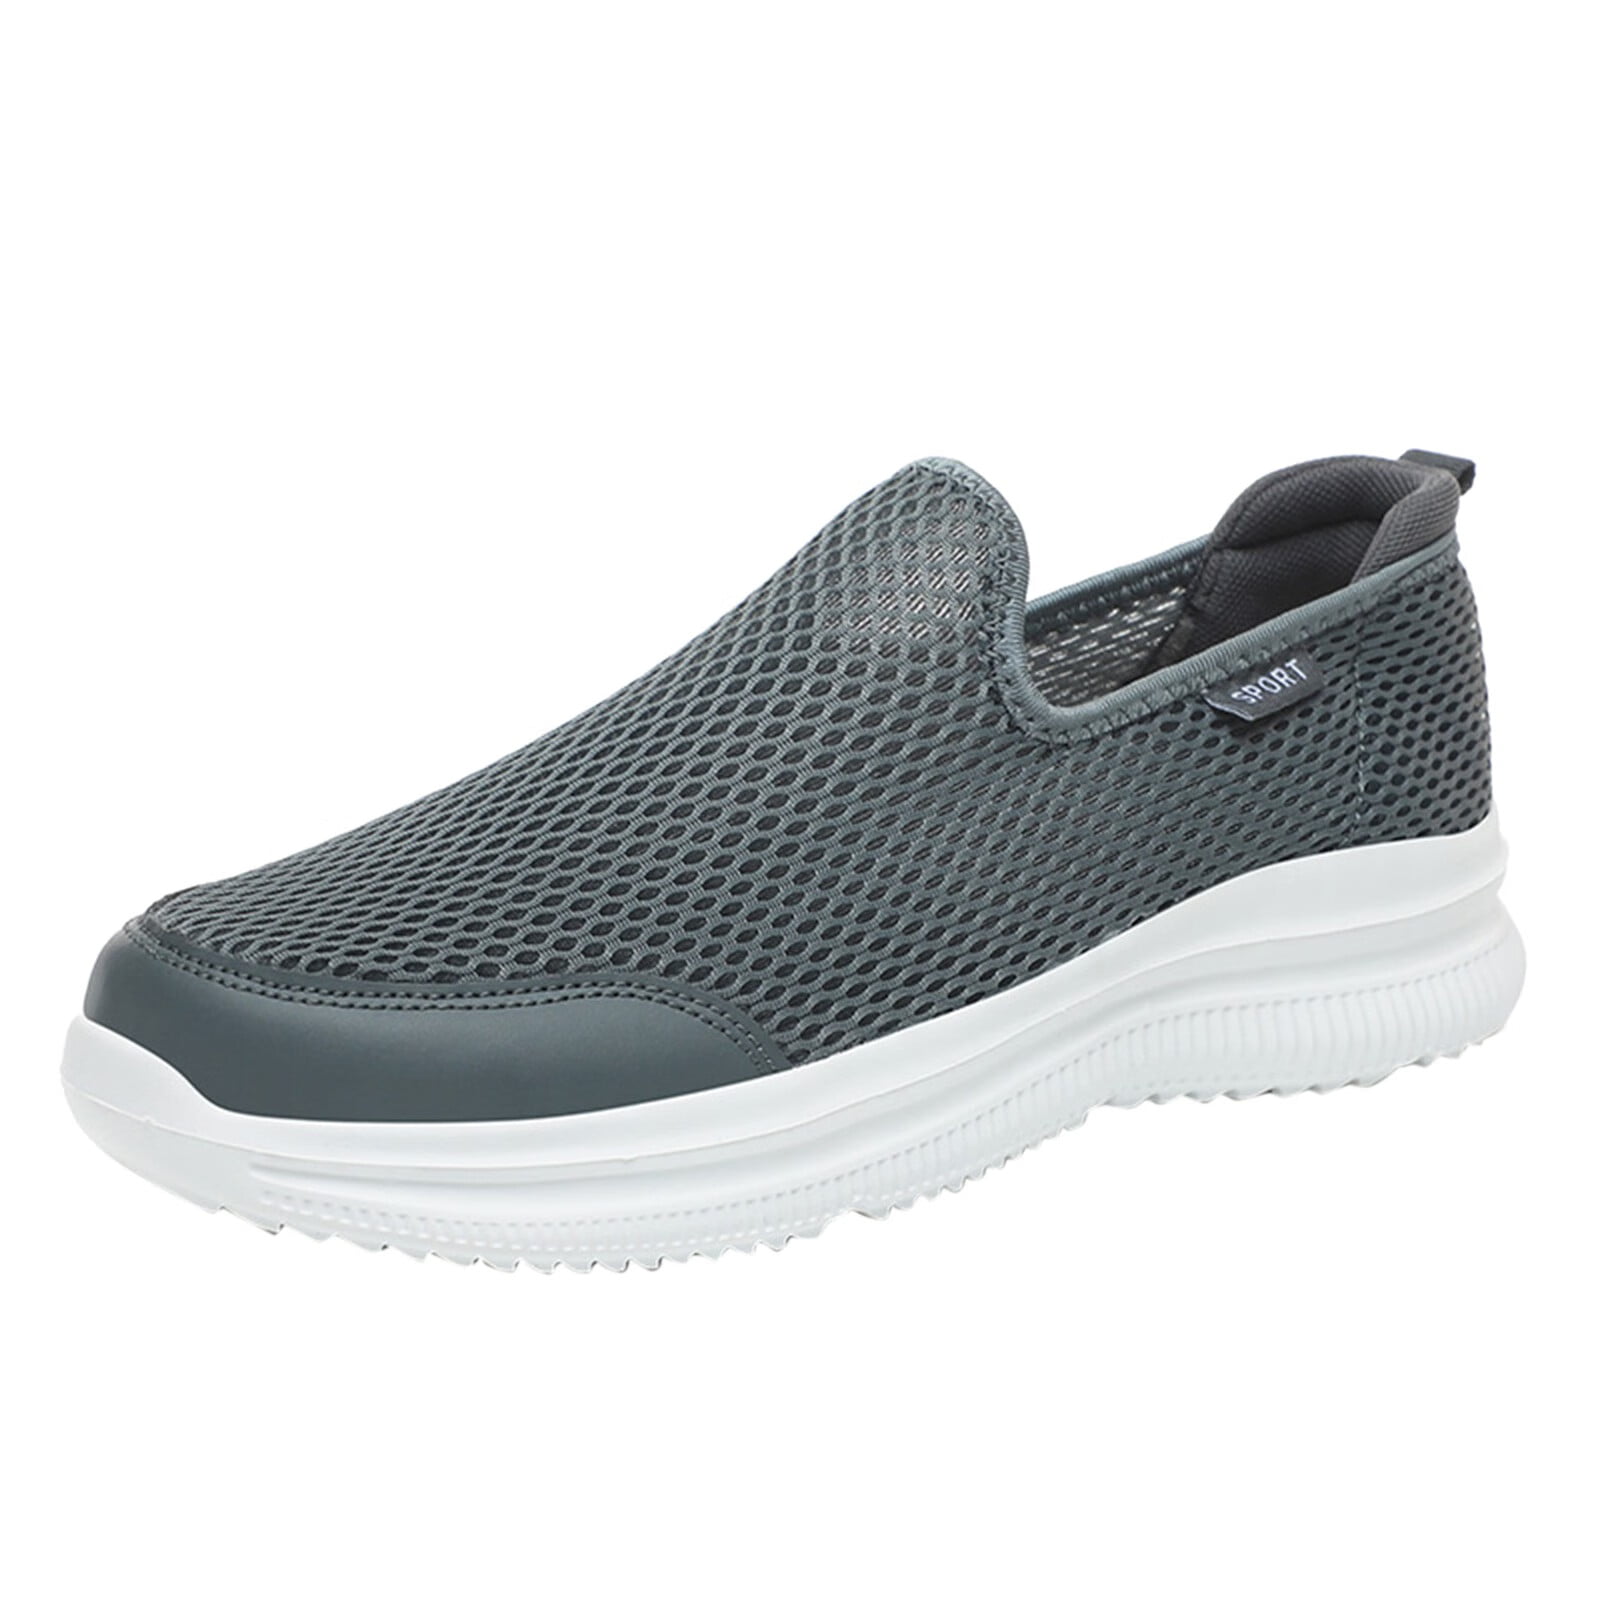 Fashion Summer Men Sneakers Breathable Mesh Shallow Mouth Slip On ...